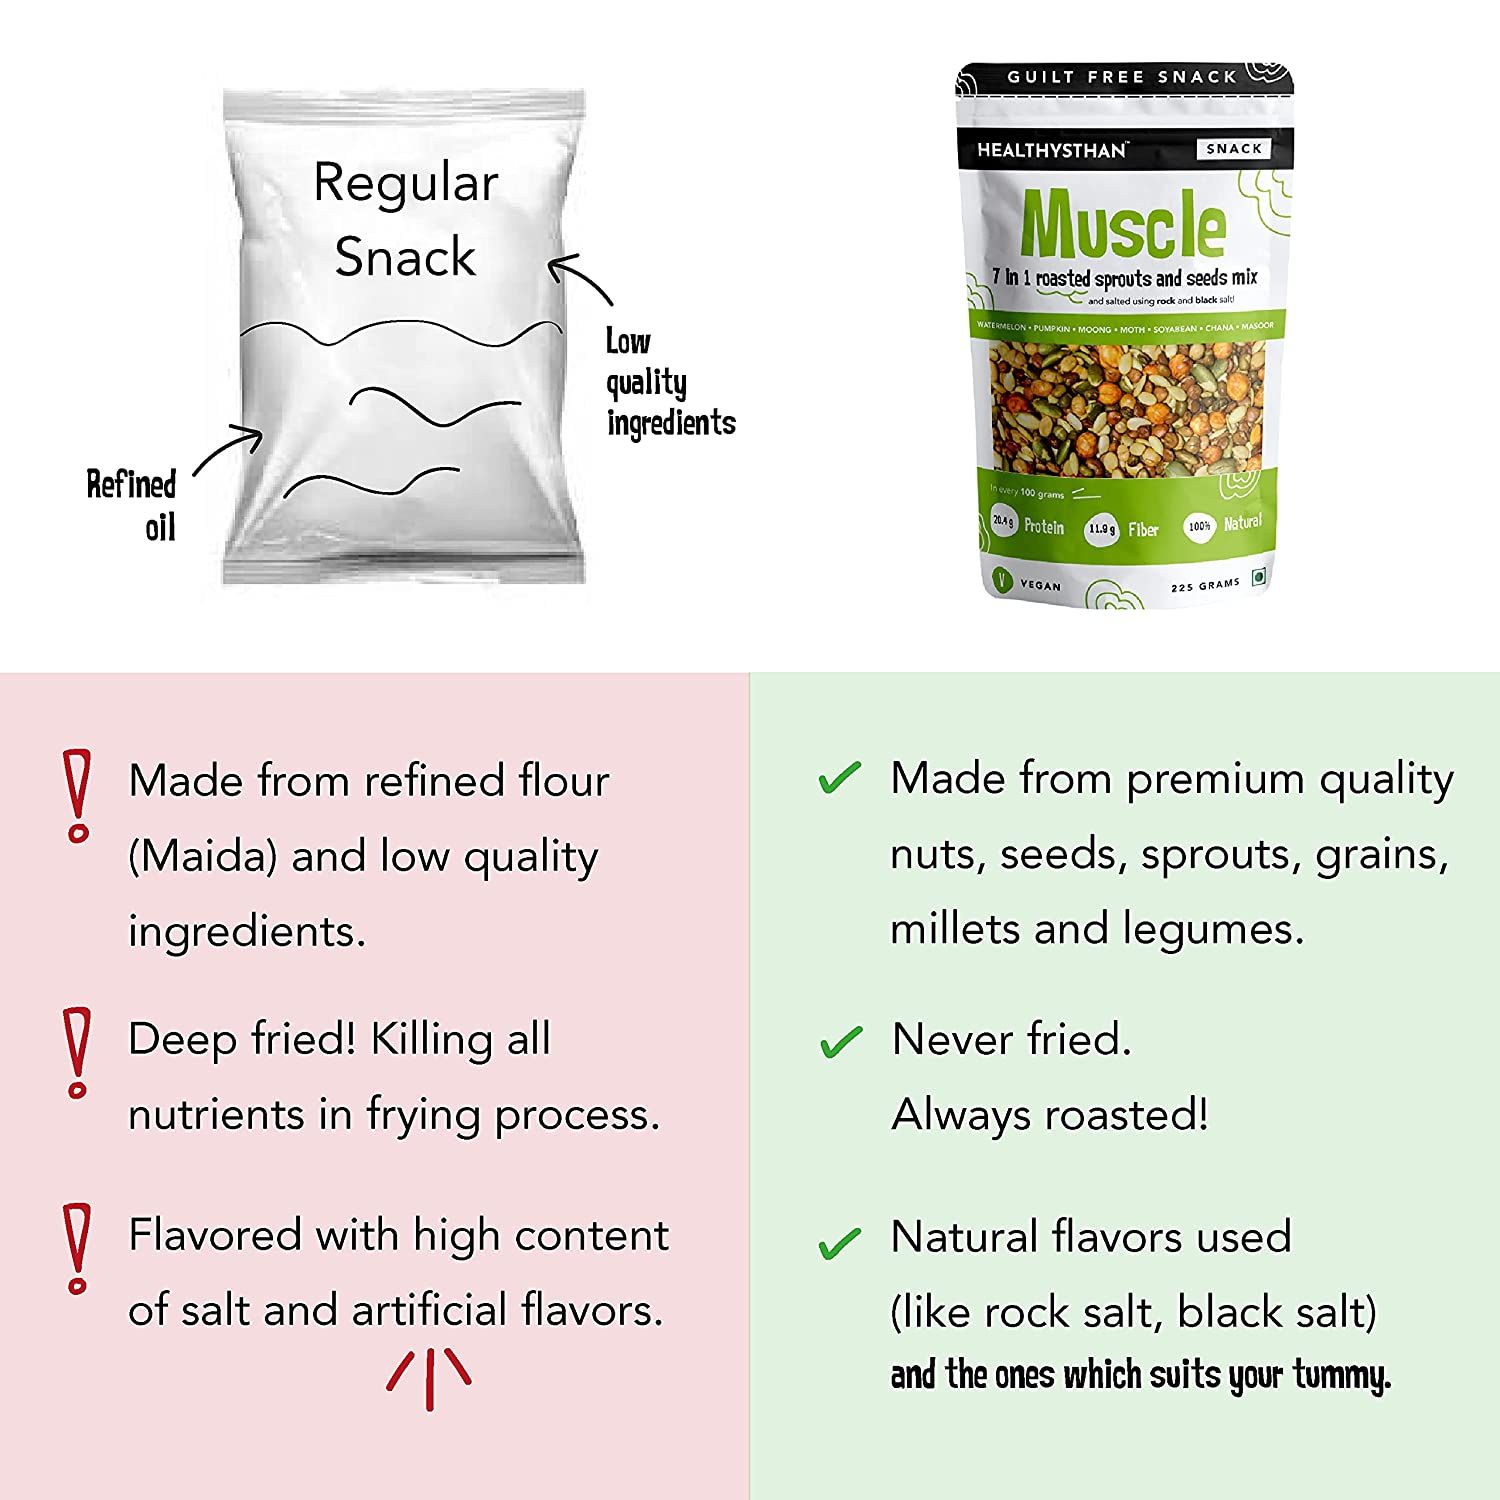 Healthysthan Muscle Roasted Sprouts and Seeds Mix Image